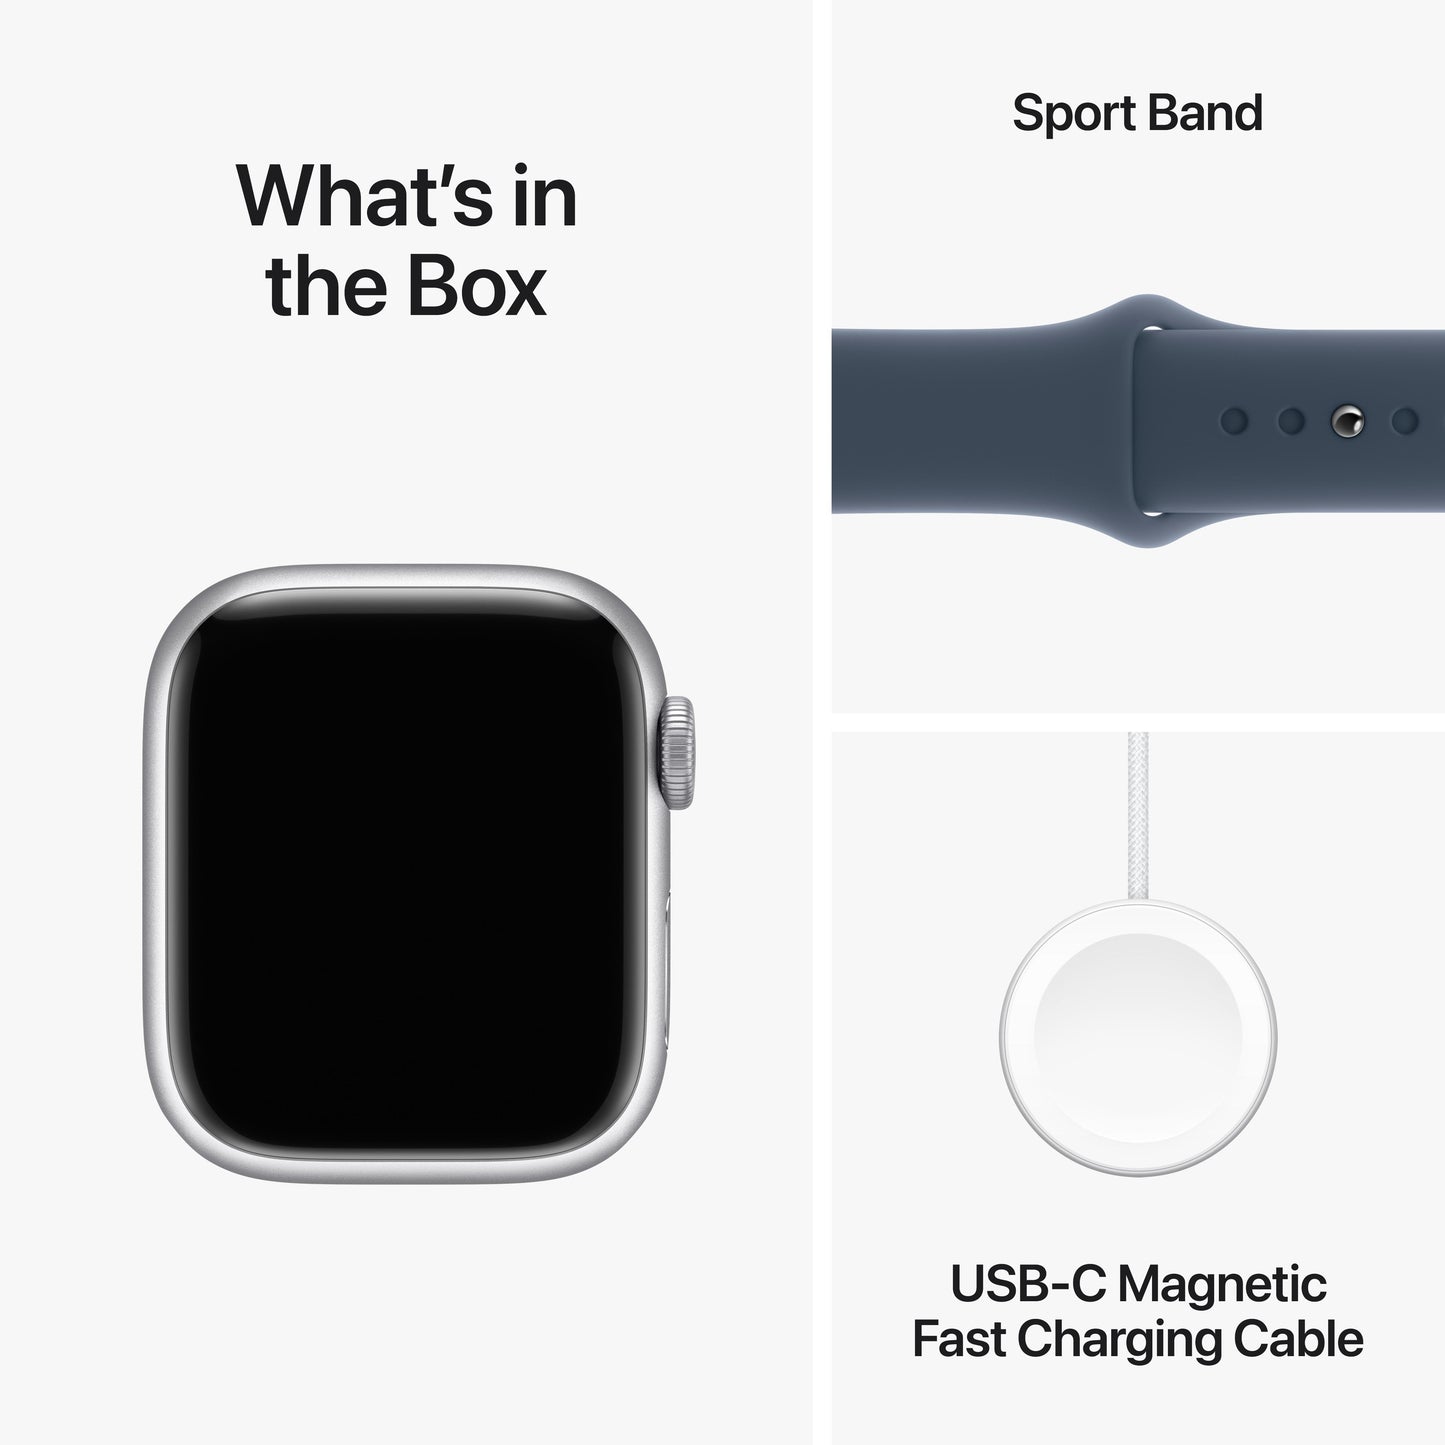 Apple Watch Series 9 GPS + Cellular 41mm Silver Aluminium Case with Storm Blue Sport Band - S/M